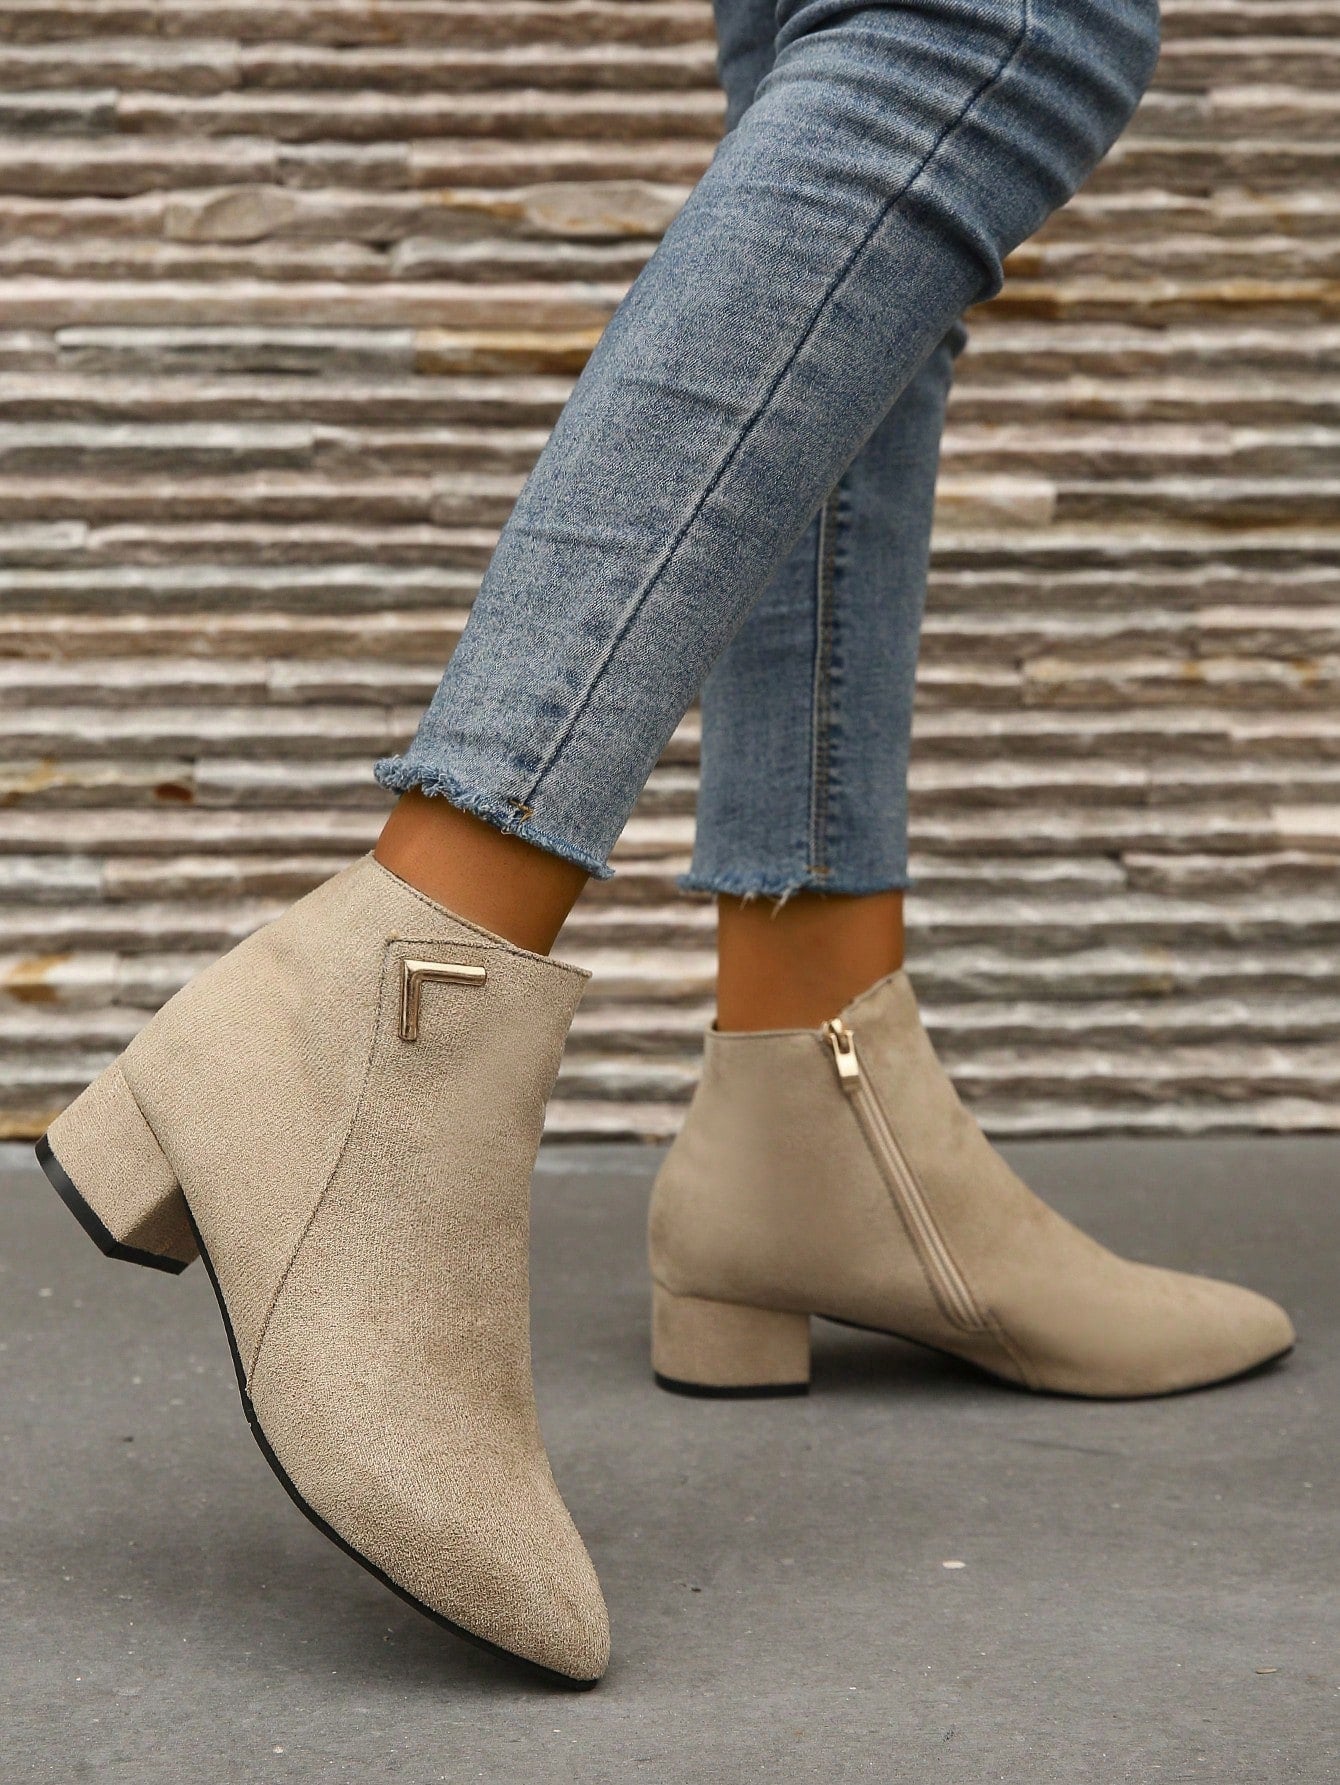 Women's Fashionable High-heeled Boots With Side Zipper And Chunky Heels